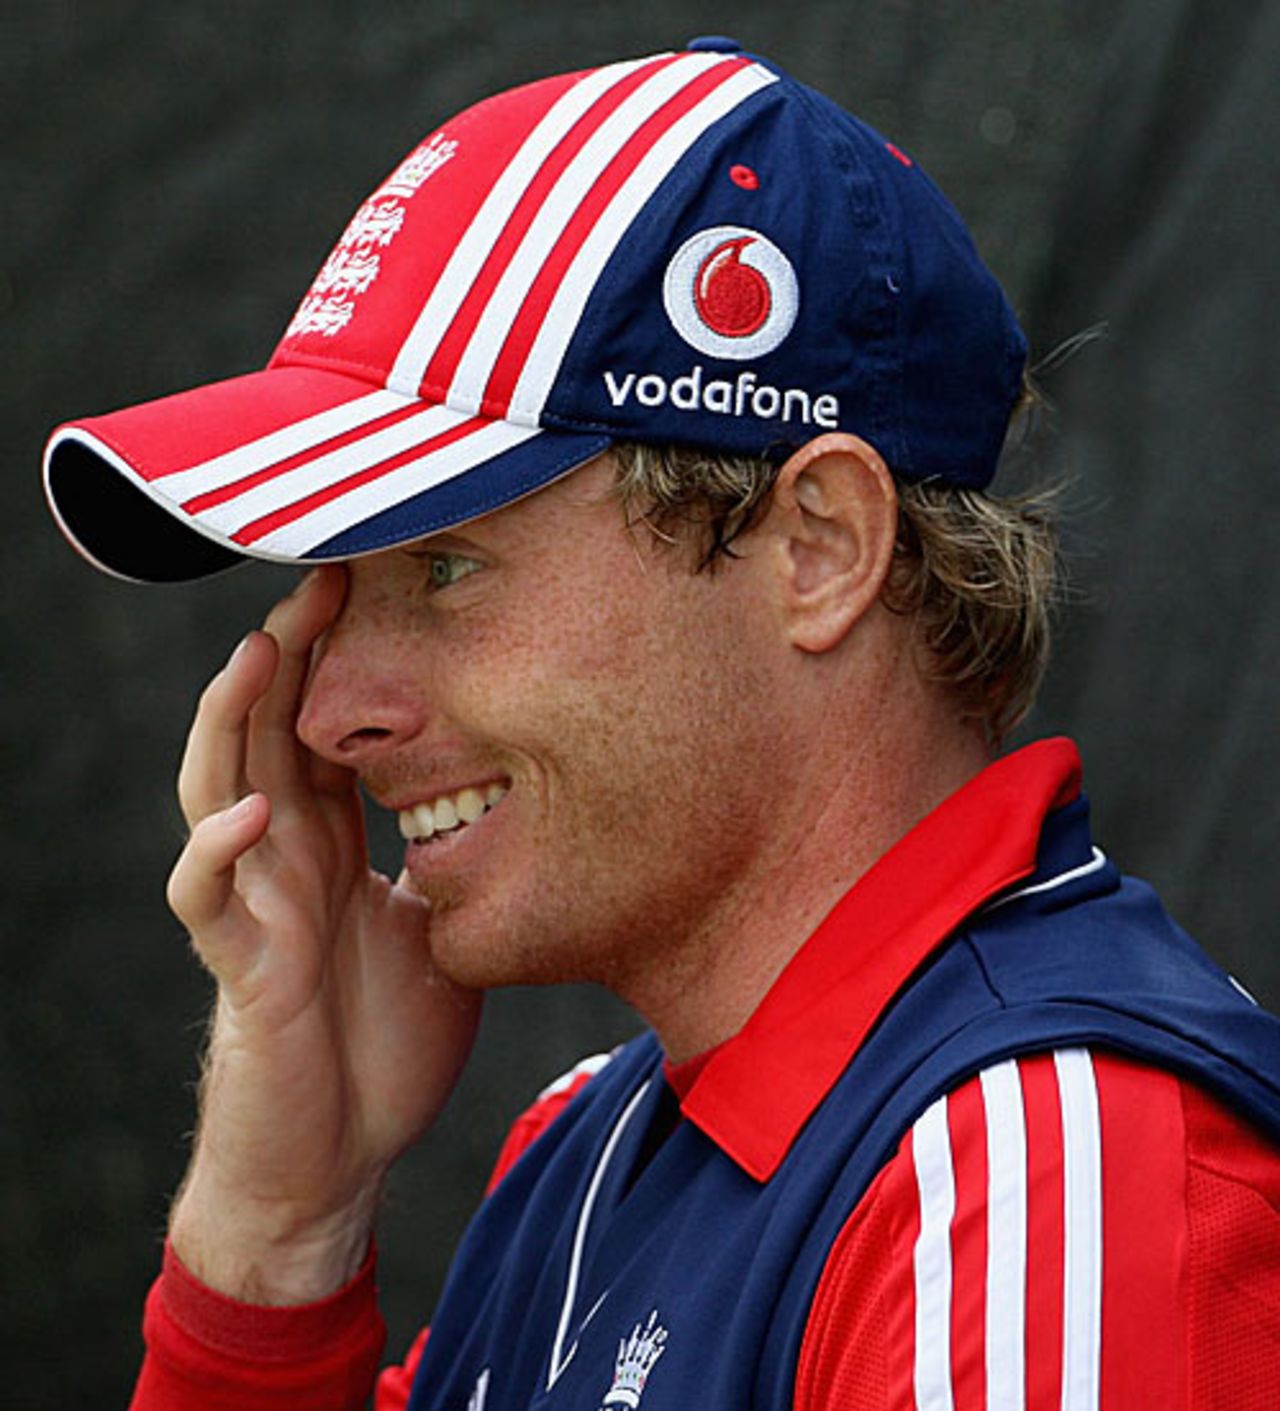 Ian Bell smiles during a warm-up session at Chester-le-Street, Chester-le-Street, June 14, 2008